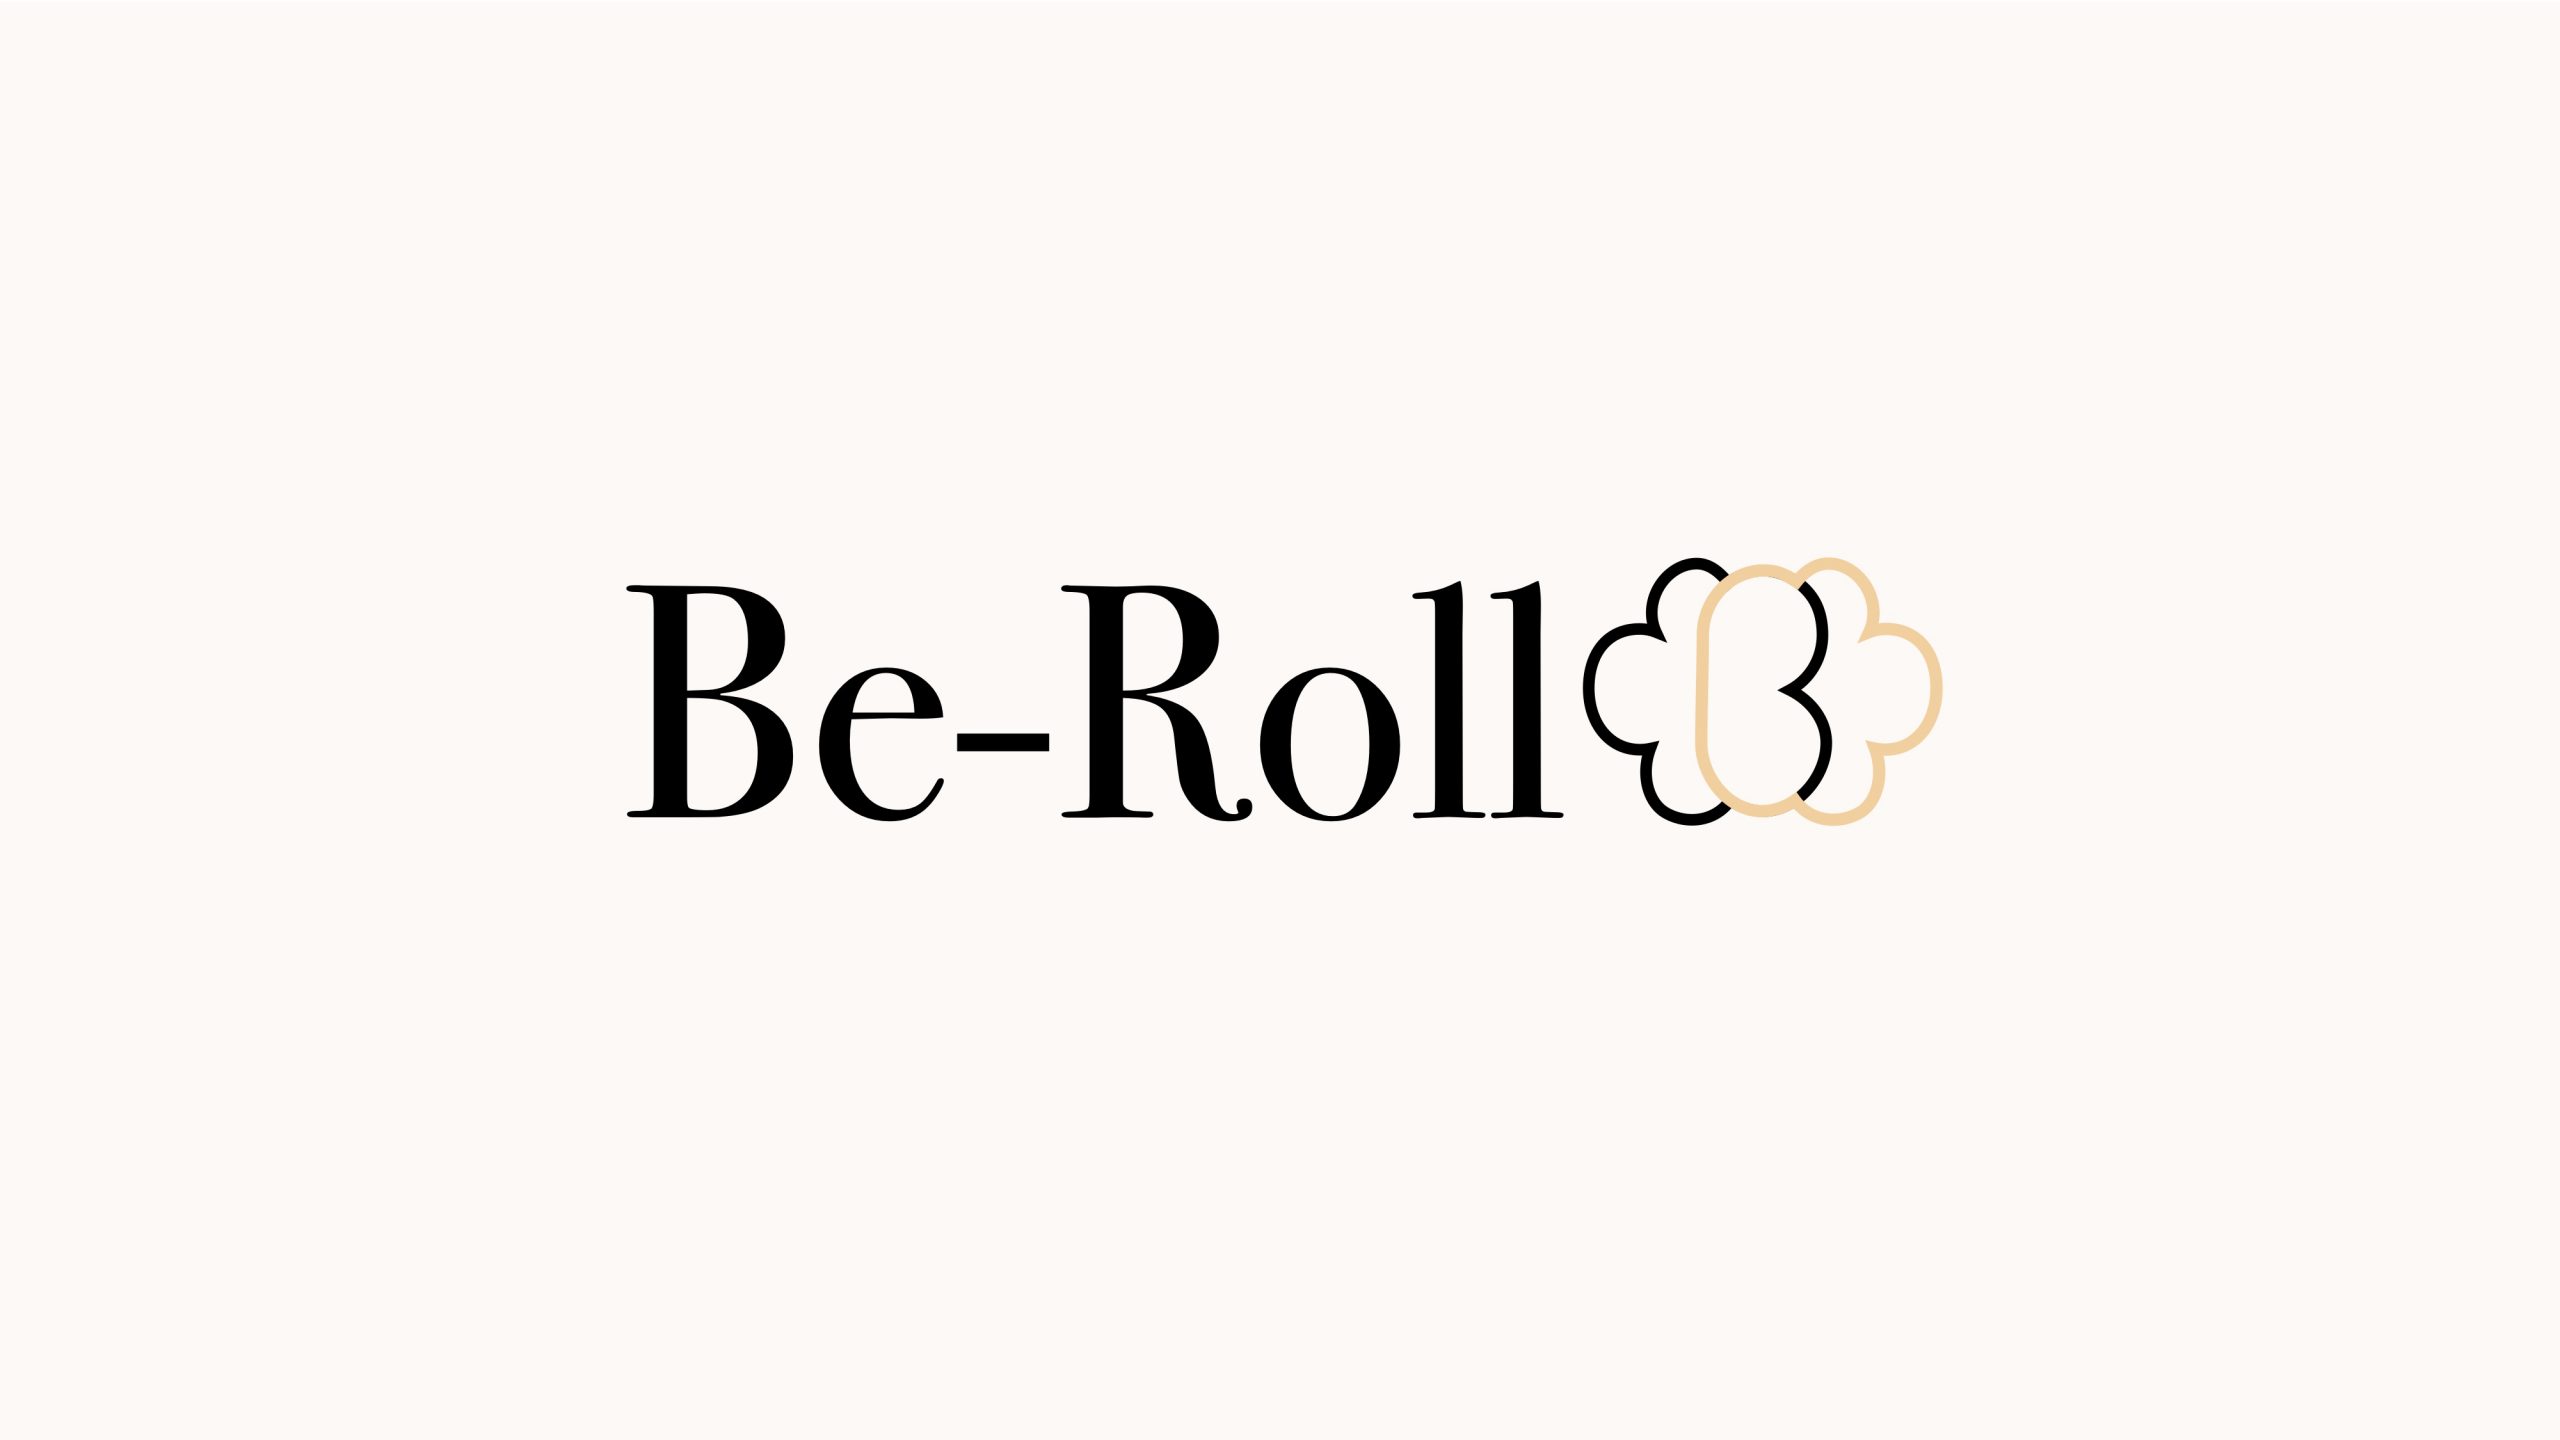 Be-Roll News Launches Unique, Weekly Newsletter Focused on Uplifting Current Events